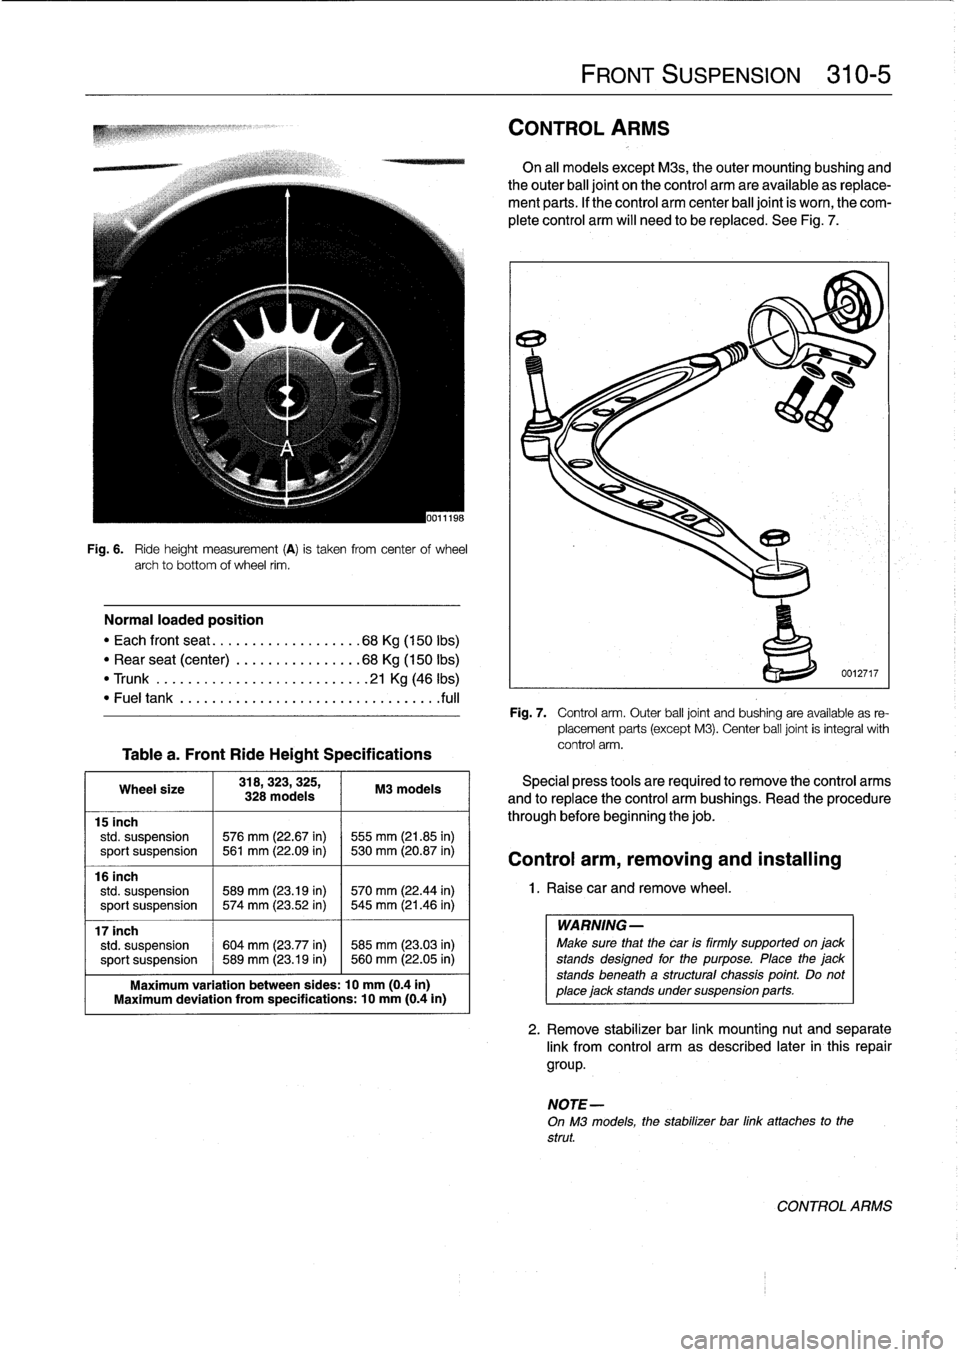 BMW 328i 1994 E36 Workshop Manual 
Fig
.
6
.

	

Ride
height
measurement
(A)
is
taken
from
centerof
wheel
archto
bottom
of
wheel
rim
.

Normal
loaded
position

"
Each
front
seat
...
...
.
..
..........
68Kg
(150
Ibs)

"
Rear
seat
(cen